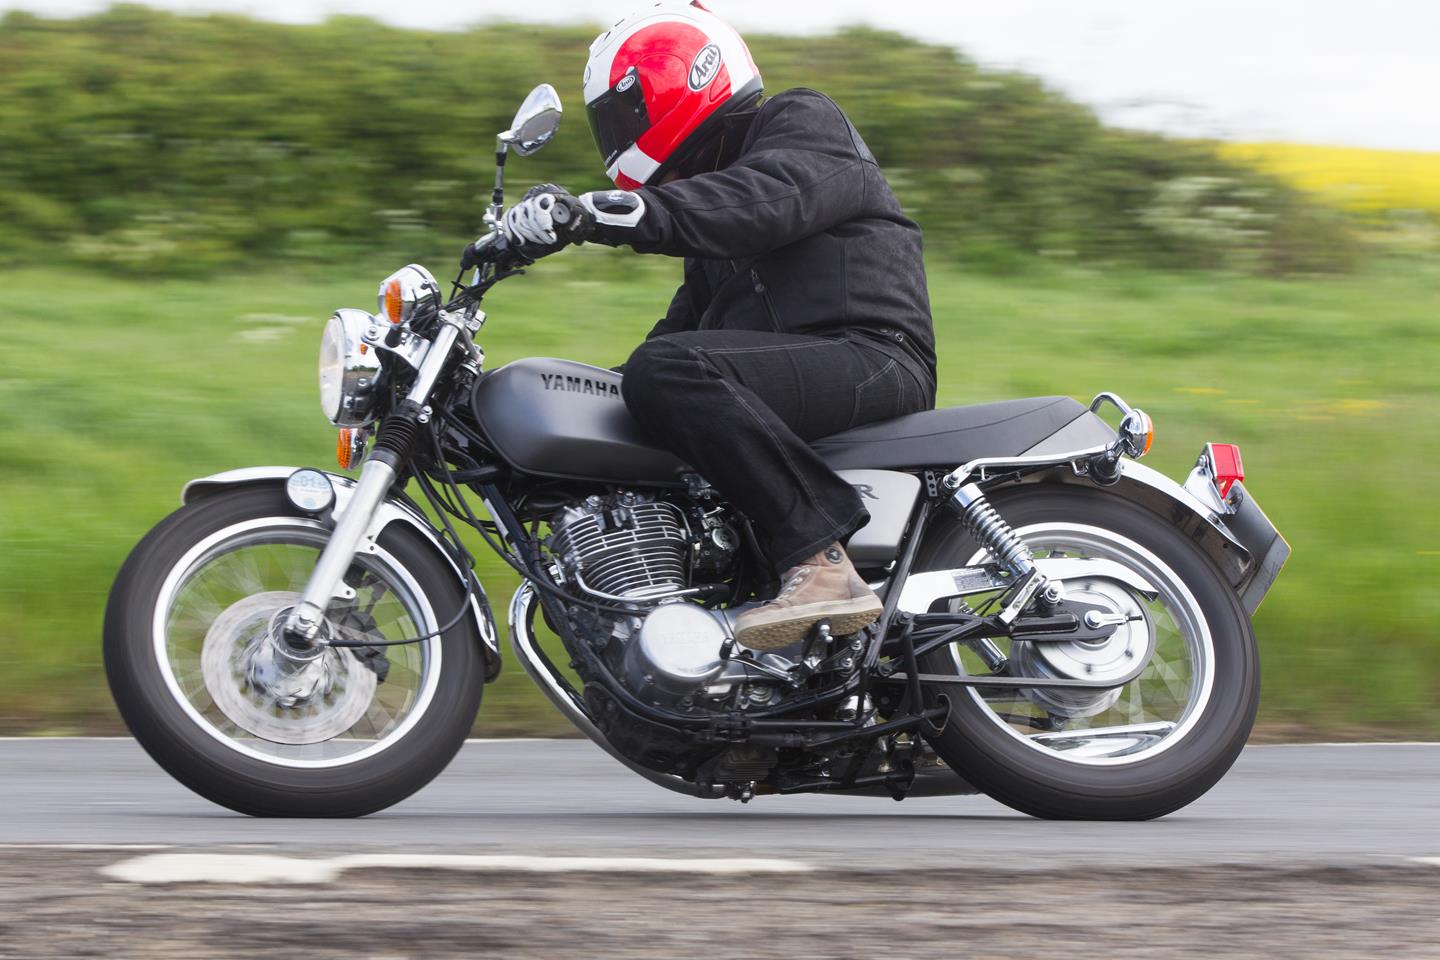 Yamaha SR400 (2014-2018) review and used buying guide